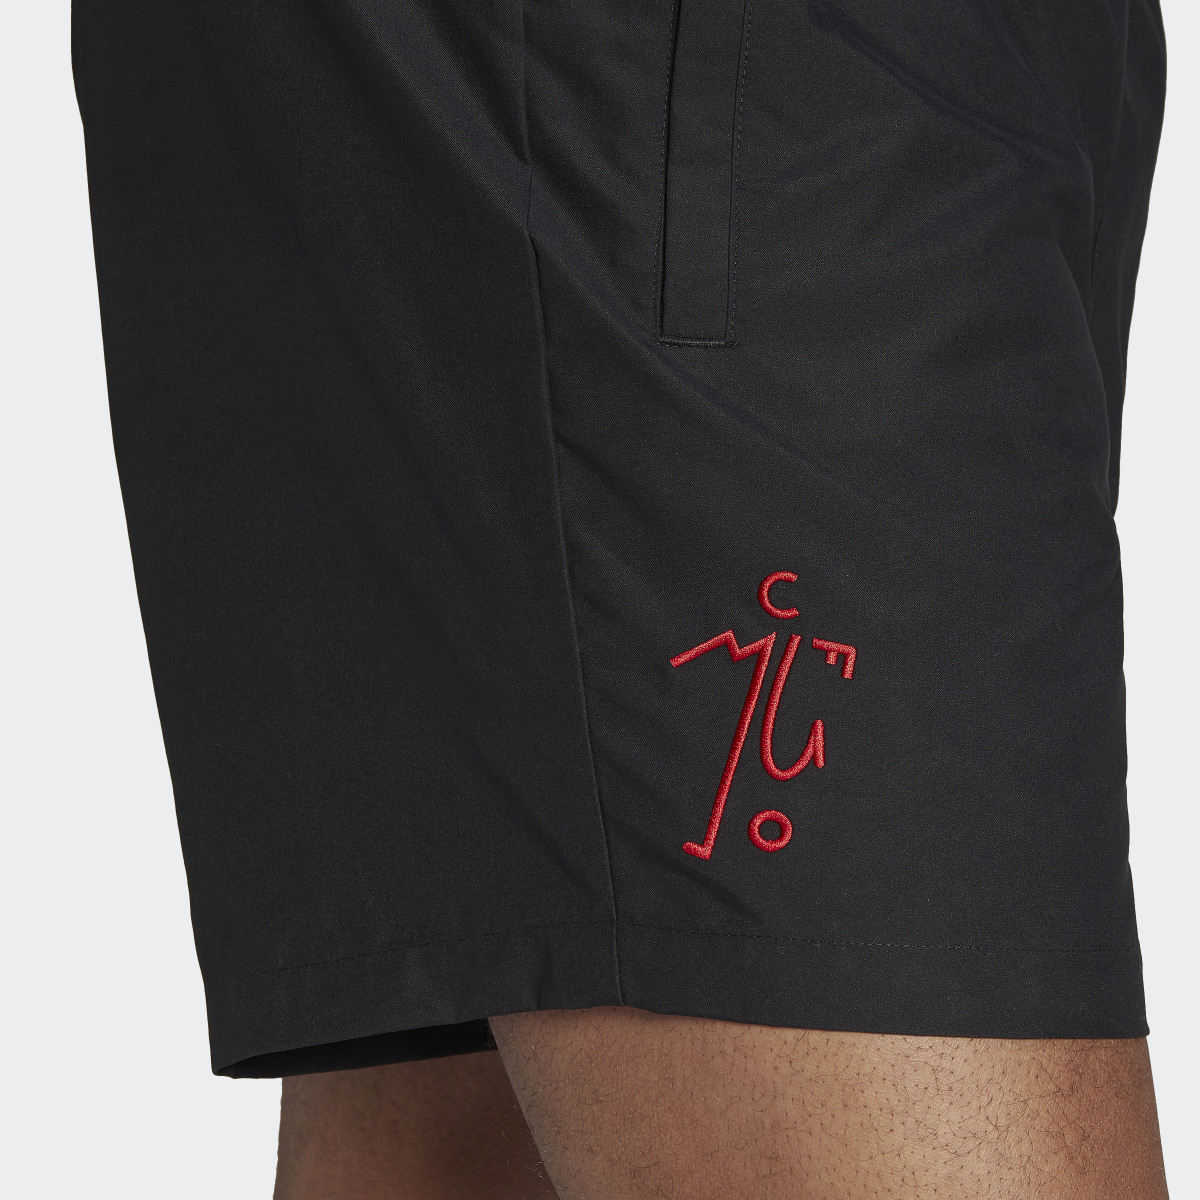 Adidas Manchester United DNA Downtime Shorts. 6